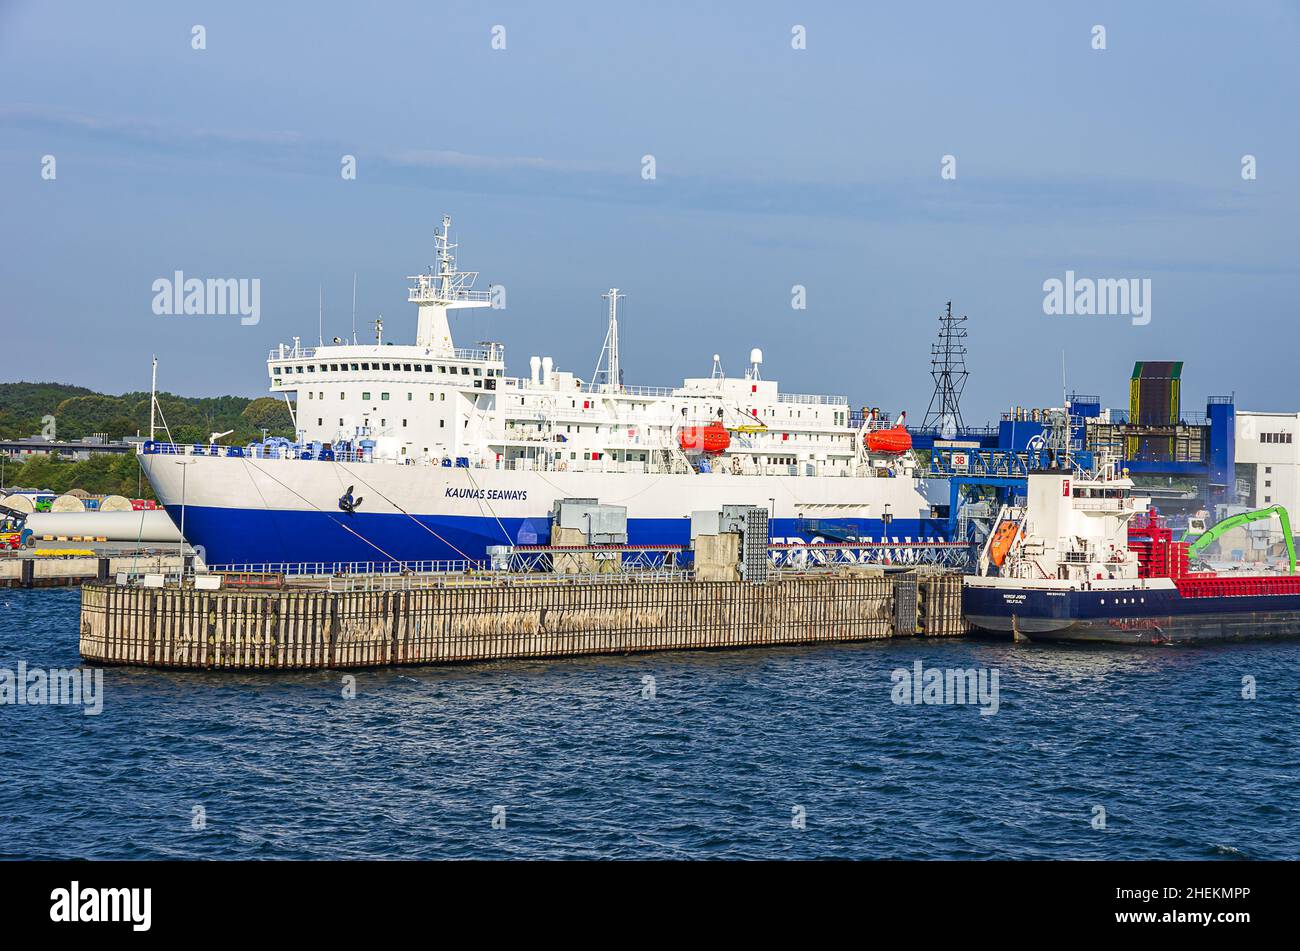 The KAUNAS SEAWAYS, a rail freight ferry, at the jetty in the ferry port of Sassnitz-Mukran, Mecklenburg-Western Pomerania, Germany, August 9, 2014. Stock Photo